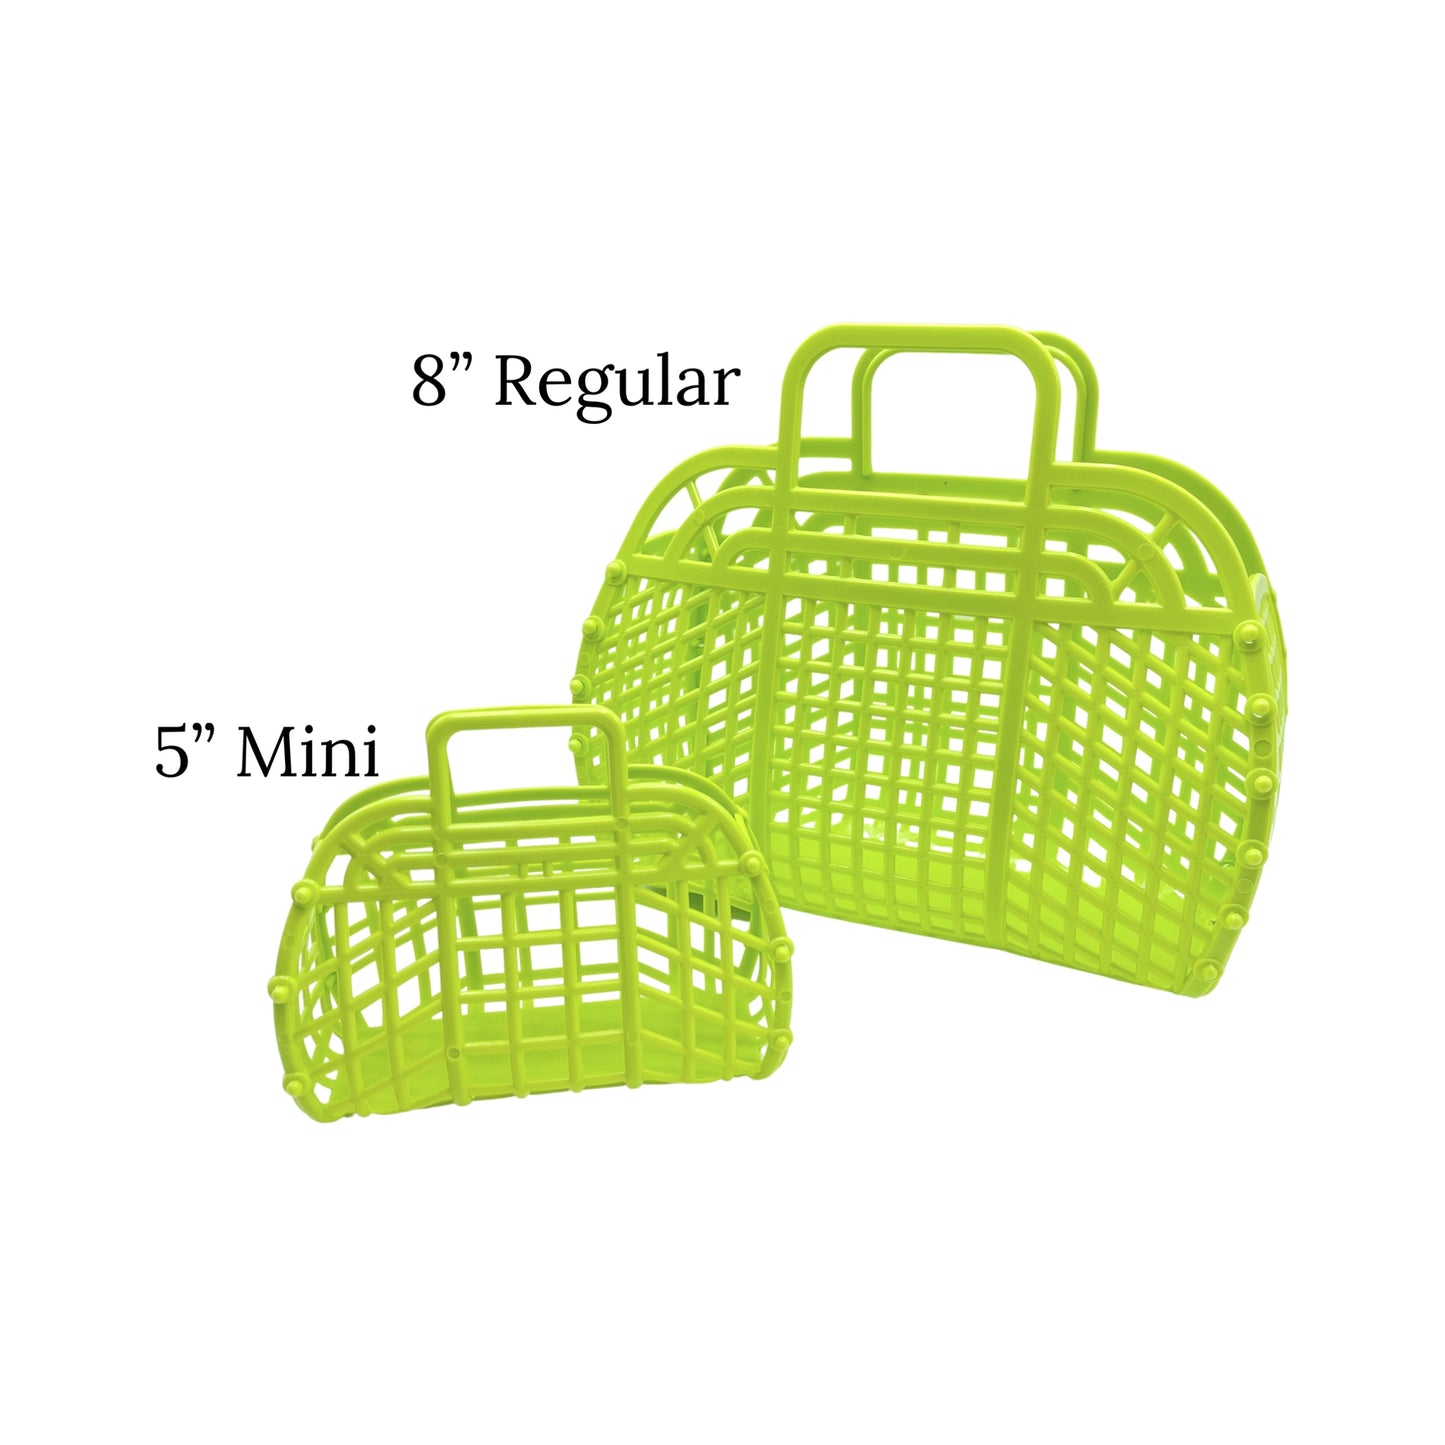 2 sizes of lime jelly bags